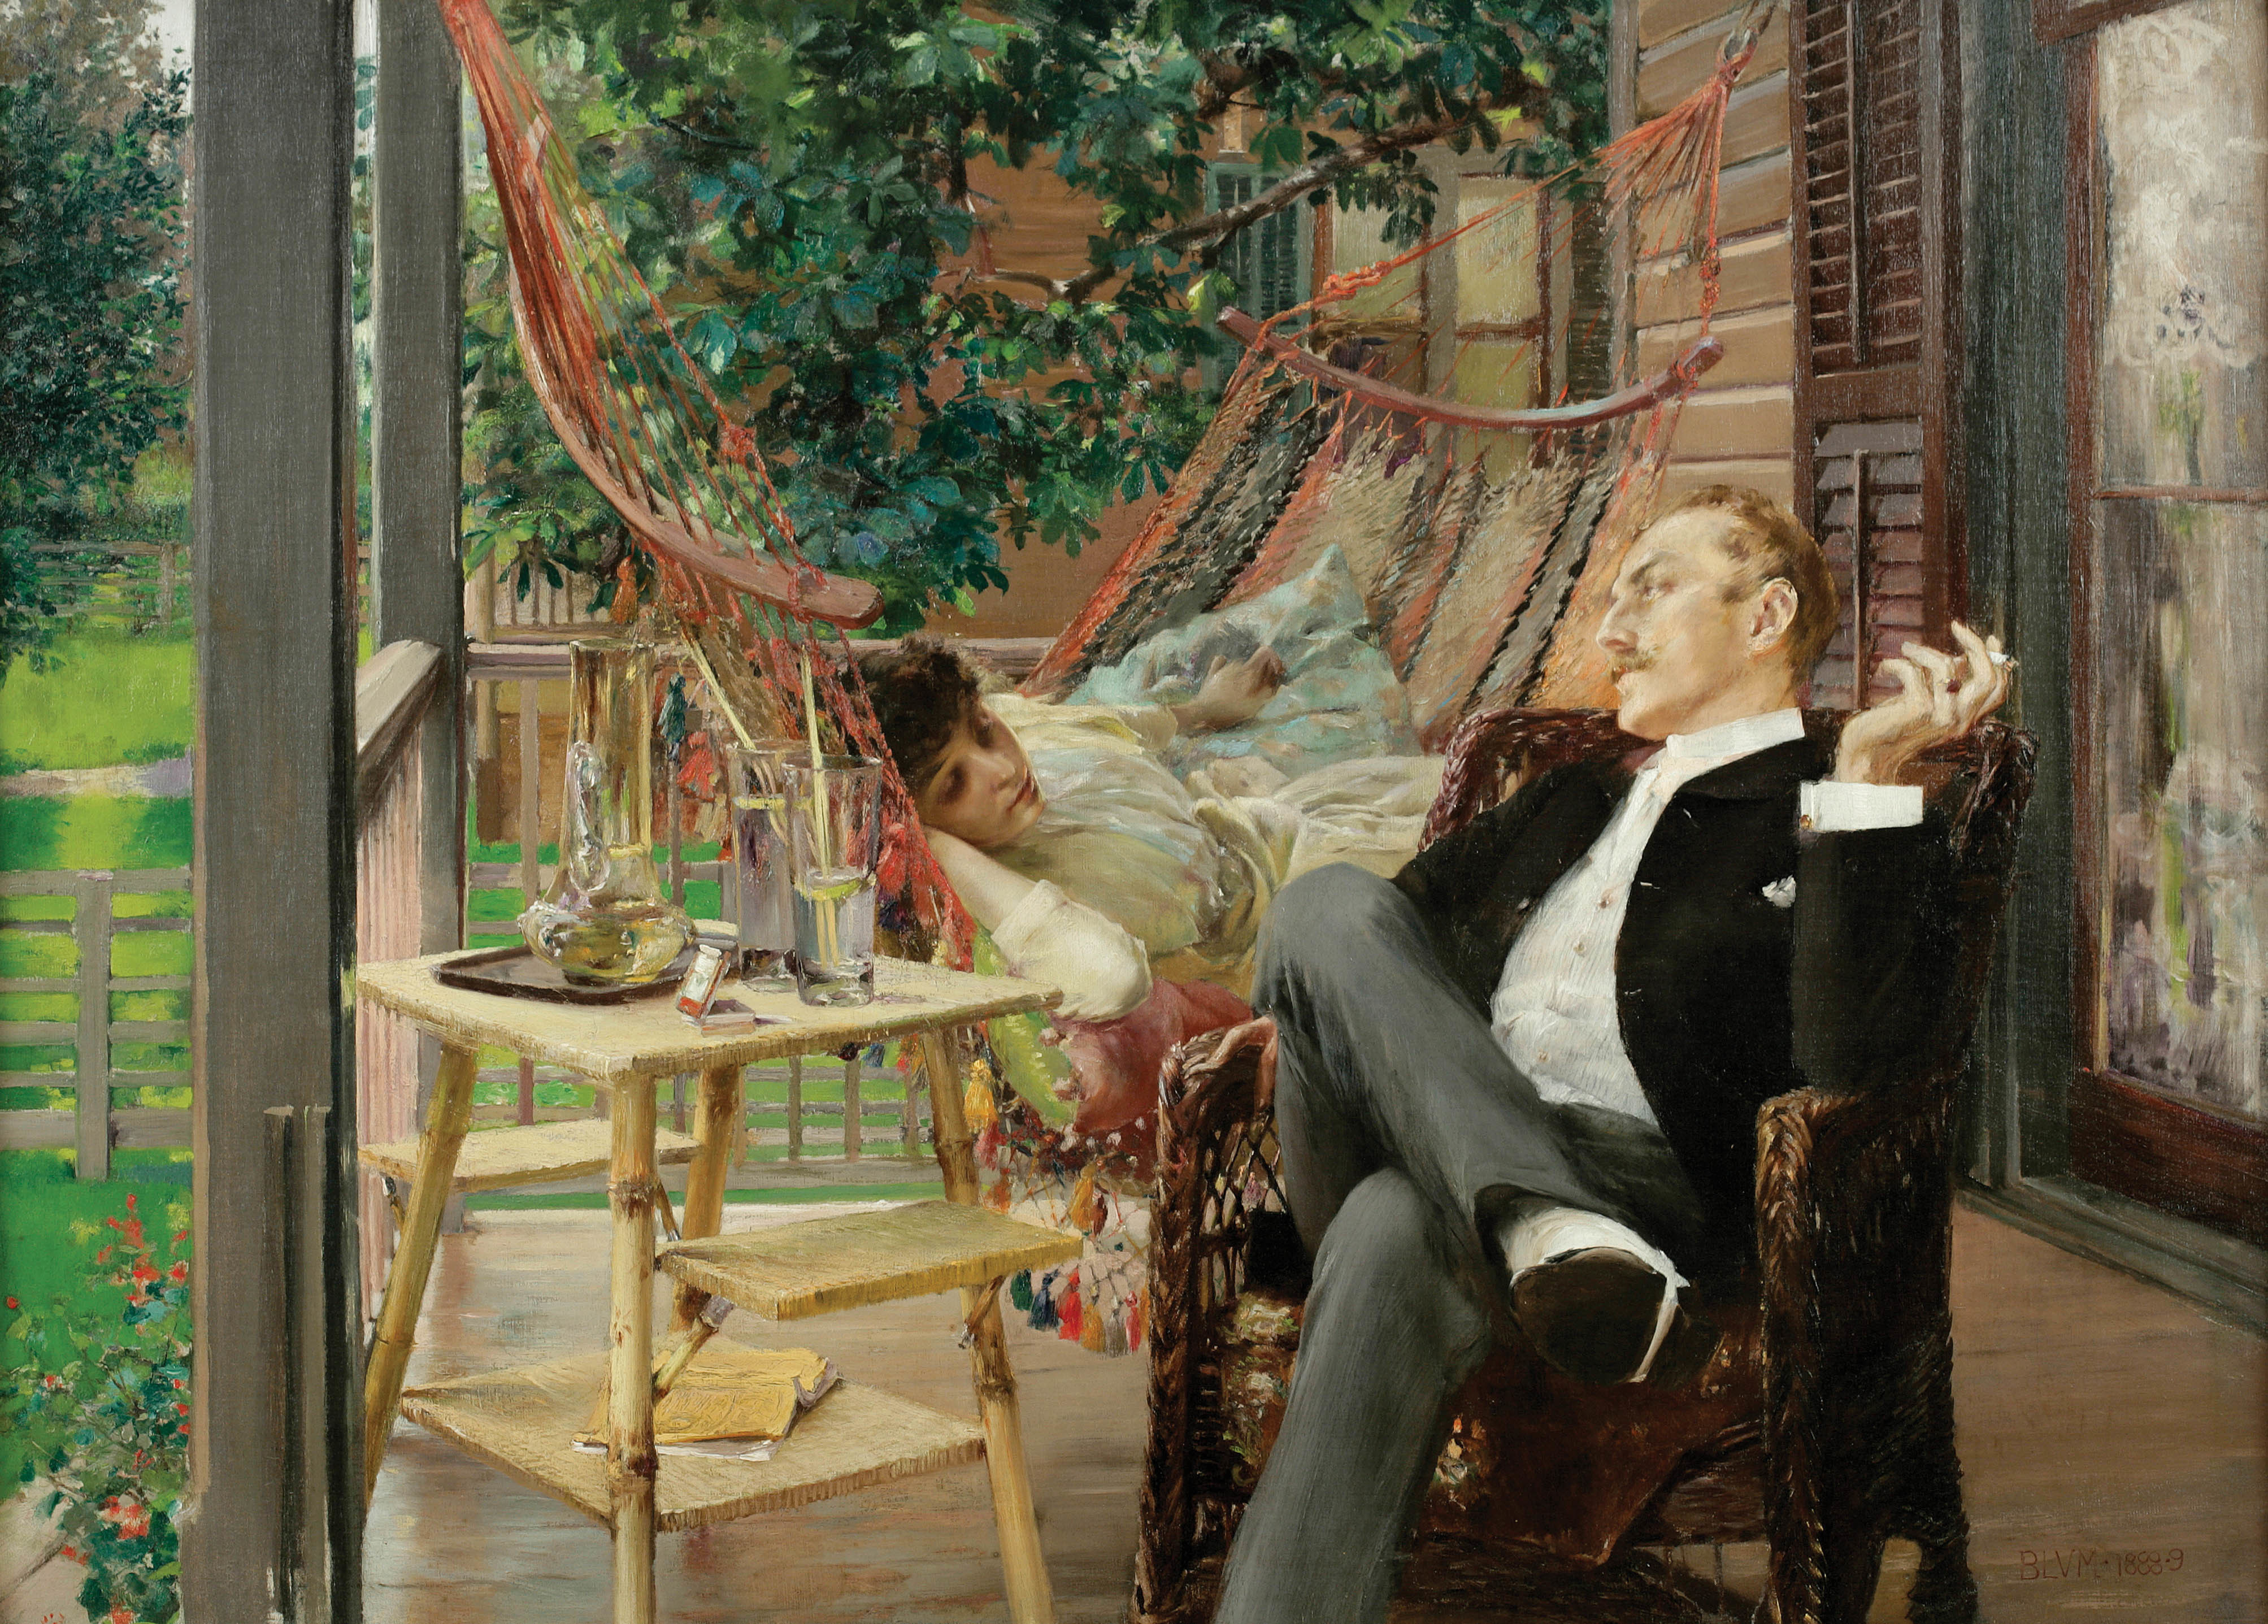 Robert Frederick Blum, "Two Idlers," ca. 1888-1889, Oil on Canvas, 29 x 40 in., National Academy of Design, New York, Courtesy American Federation of Arts